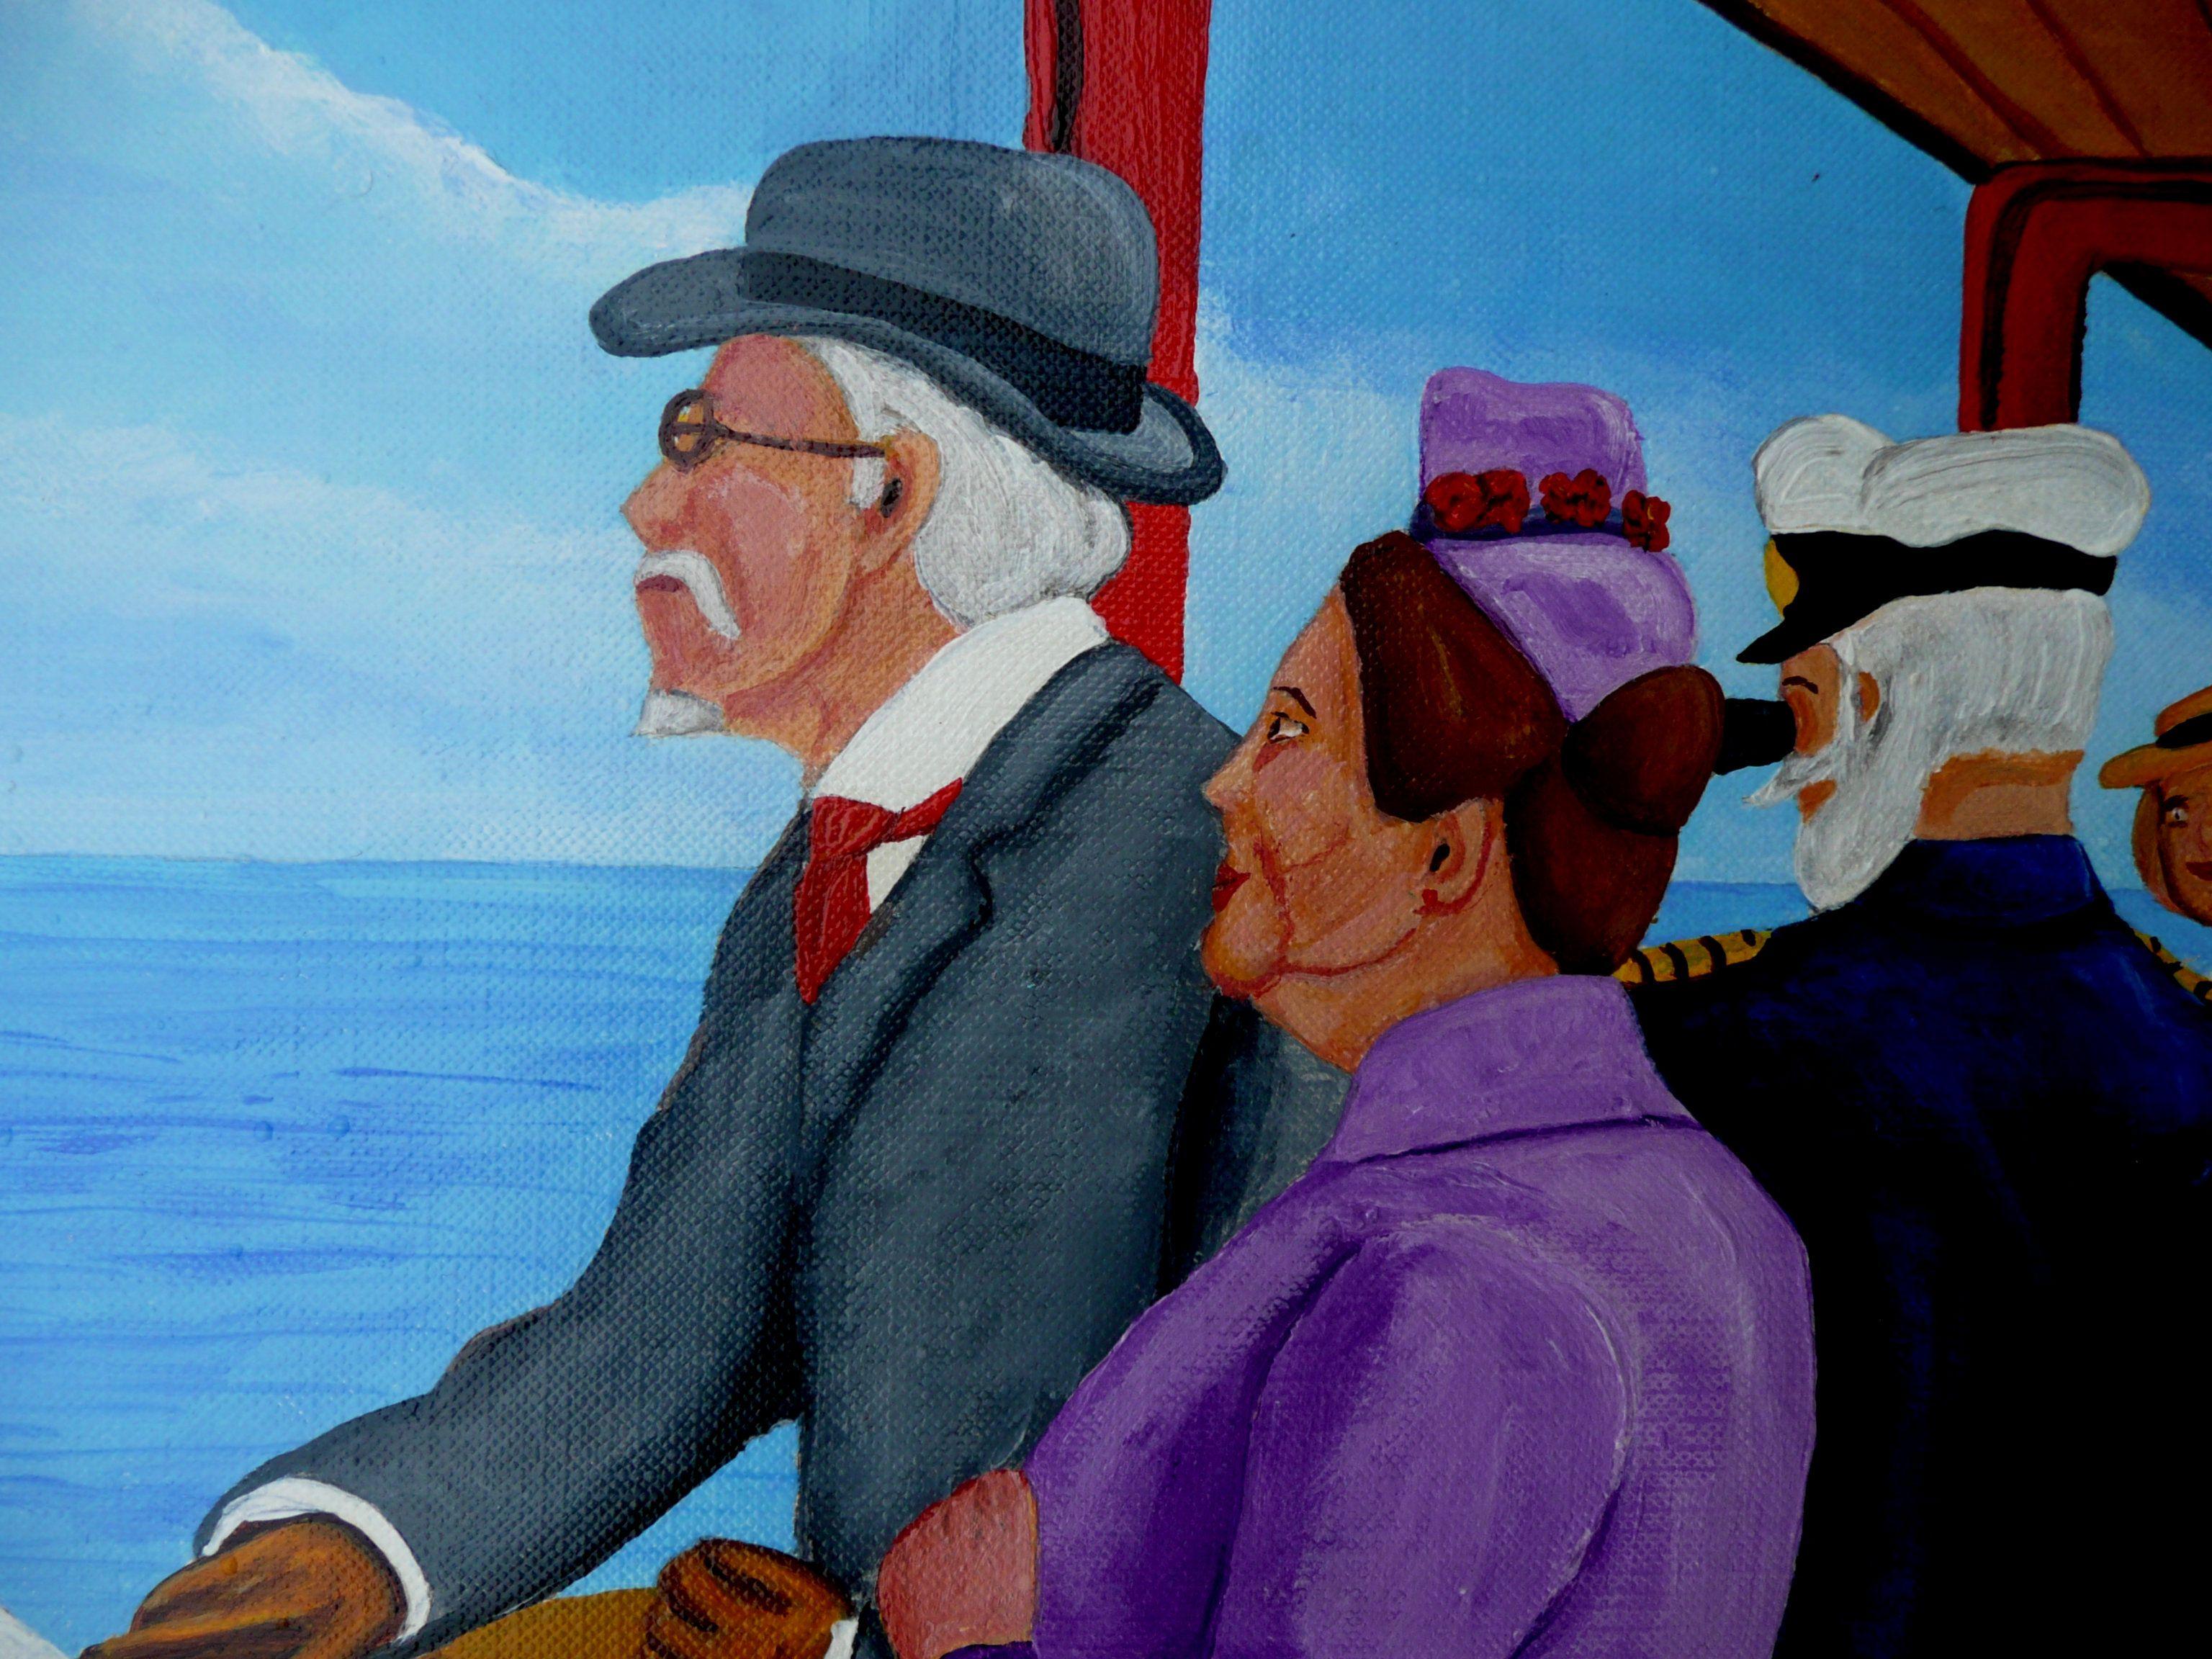 People on a cruise ship enjoy the sea air up on deck. A historical set at the turn of the last century. This piece is 20X16 inches and has been created using only professional grade acrylics on special acrylics canvas paper. :: Painting ::